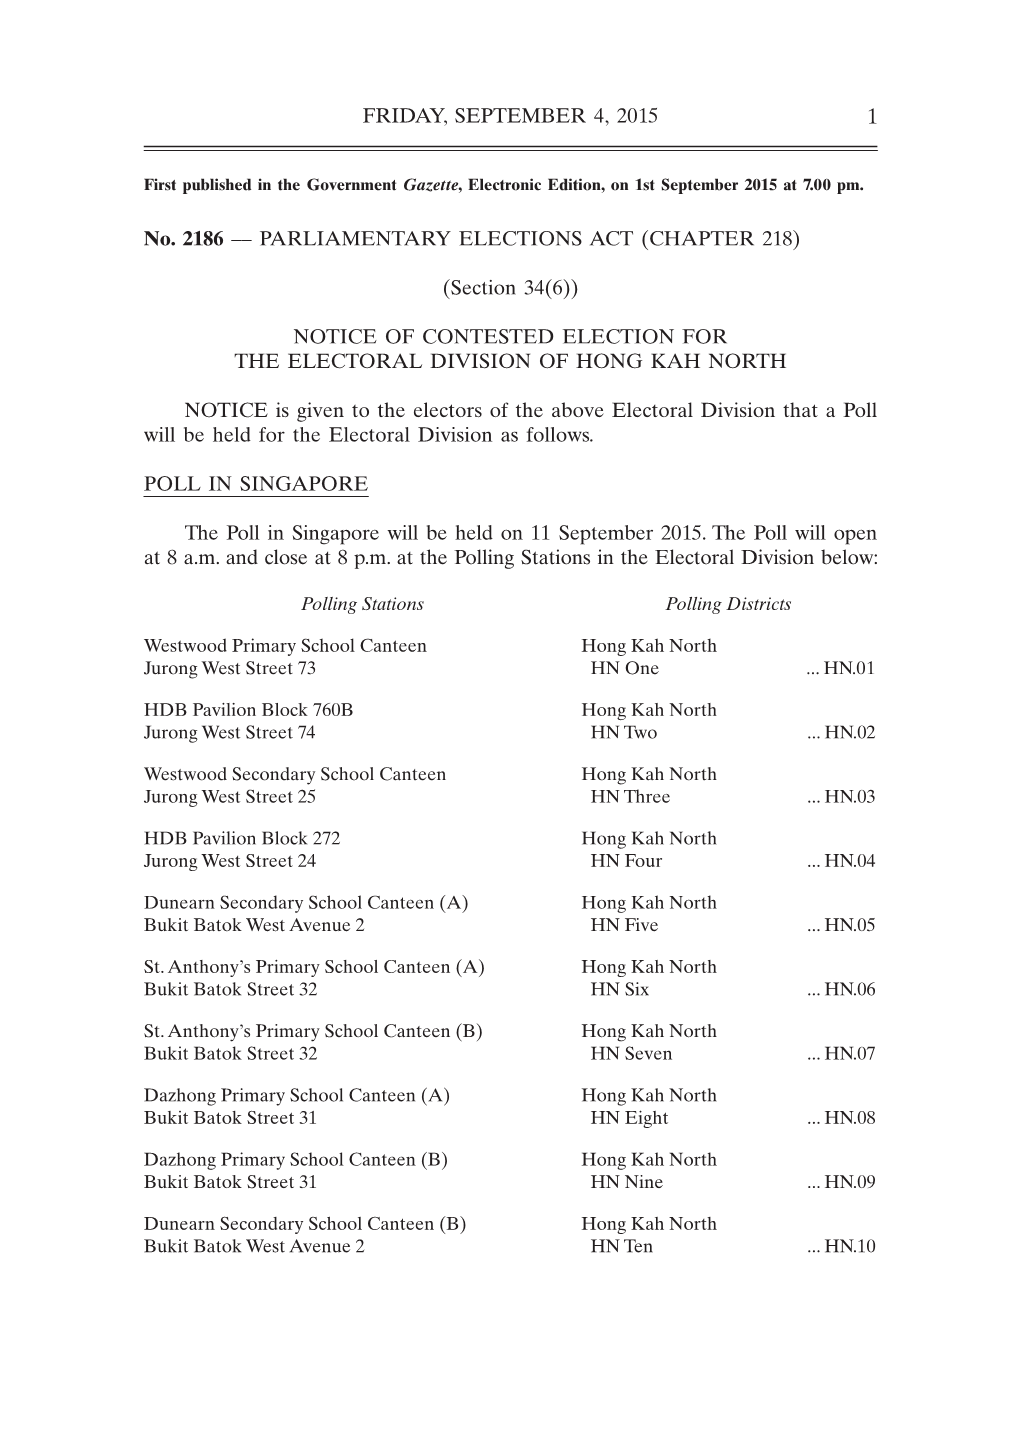 Notice of Contested Election for the Electoral Division of Hong Kah North